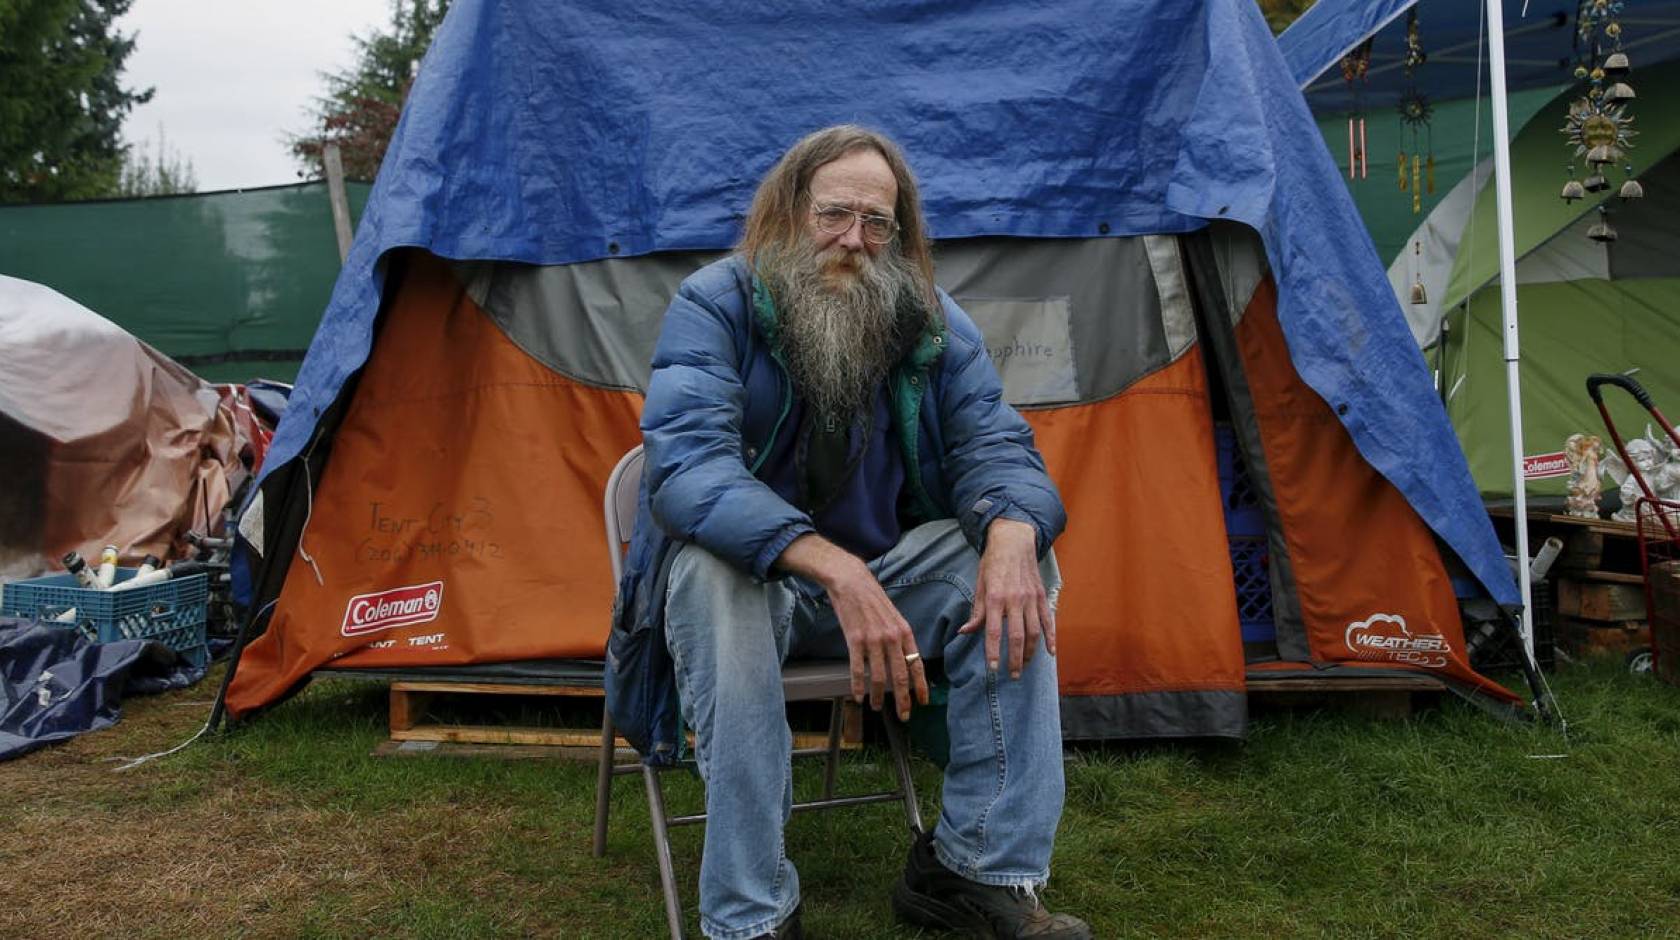 Lantz Rowland poses in front of his tent outside Seattle, Washington.